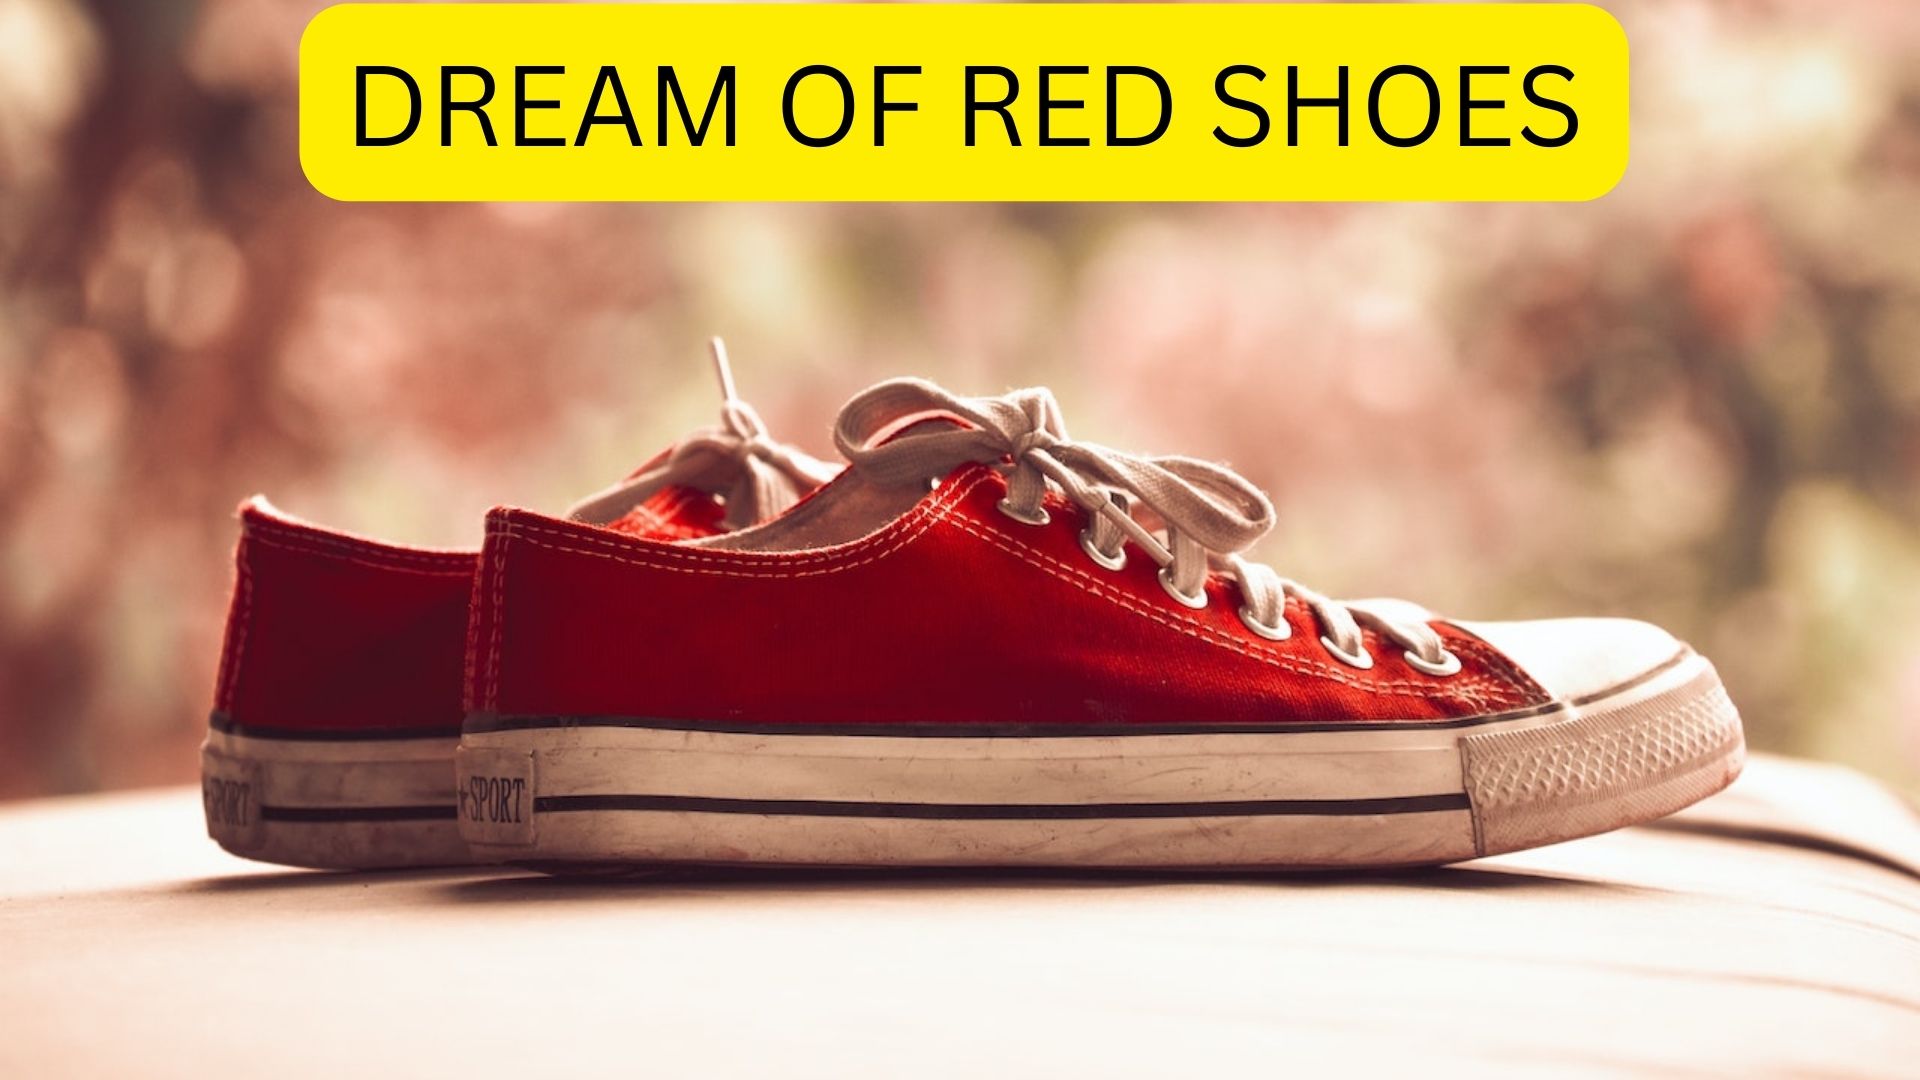 Dream Of Red Shoes - Fix Something In Your Life